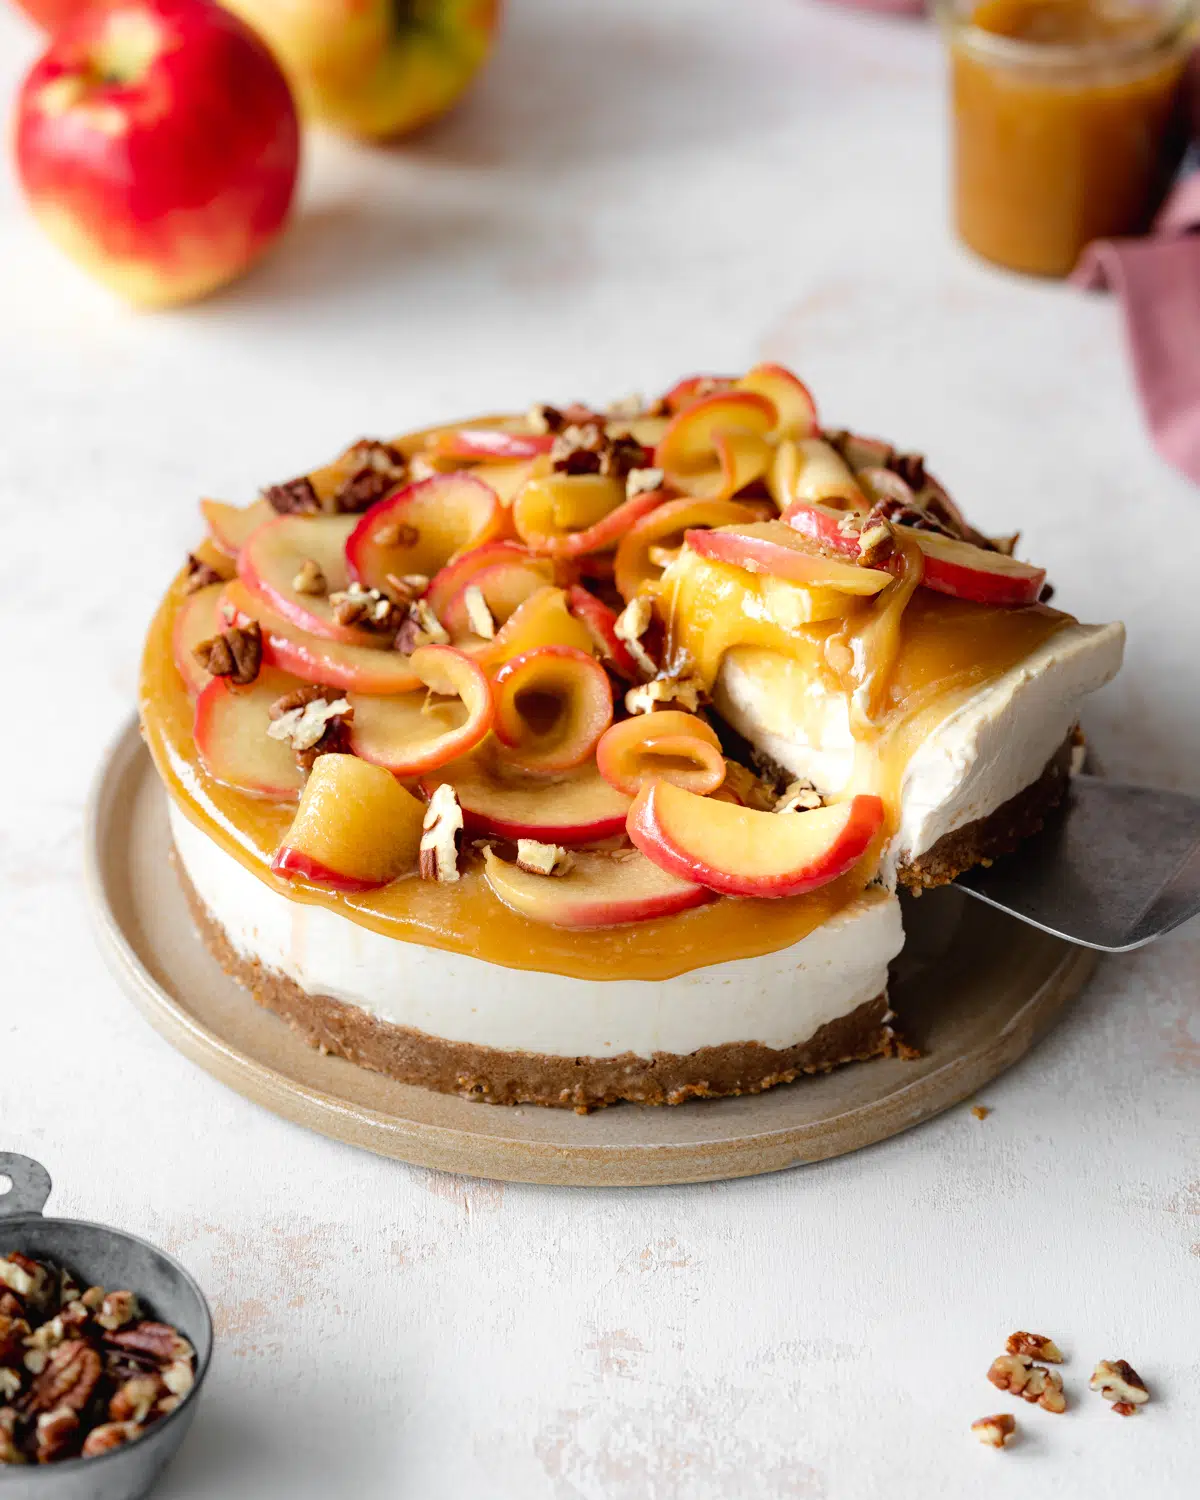 vegan cheesecake with caramel and apples on top.